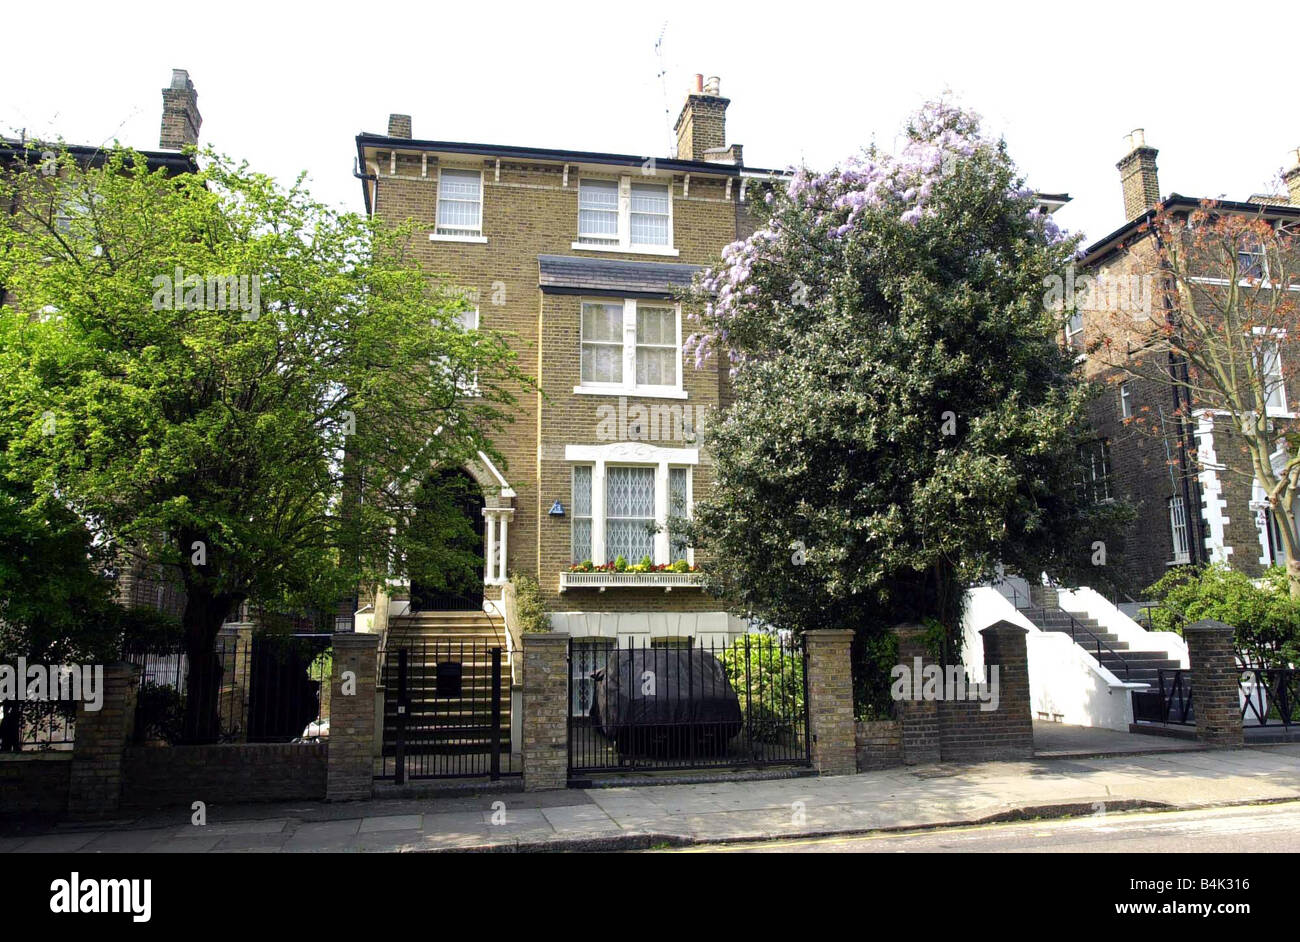 The Elsworthy Road home of Oasis singer Liam Gallagher and wife Patsy Kensit in London May 2000 Stock Photo